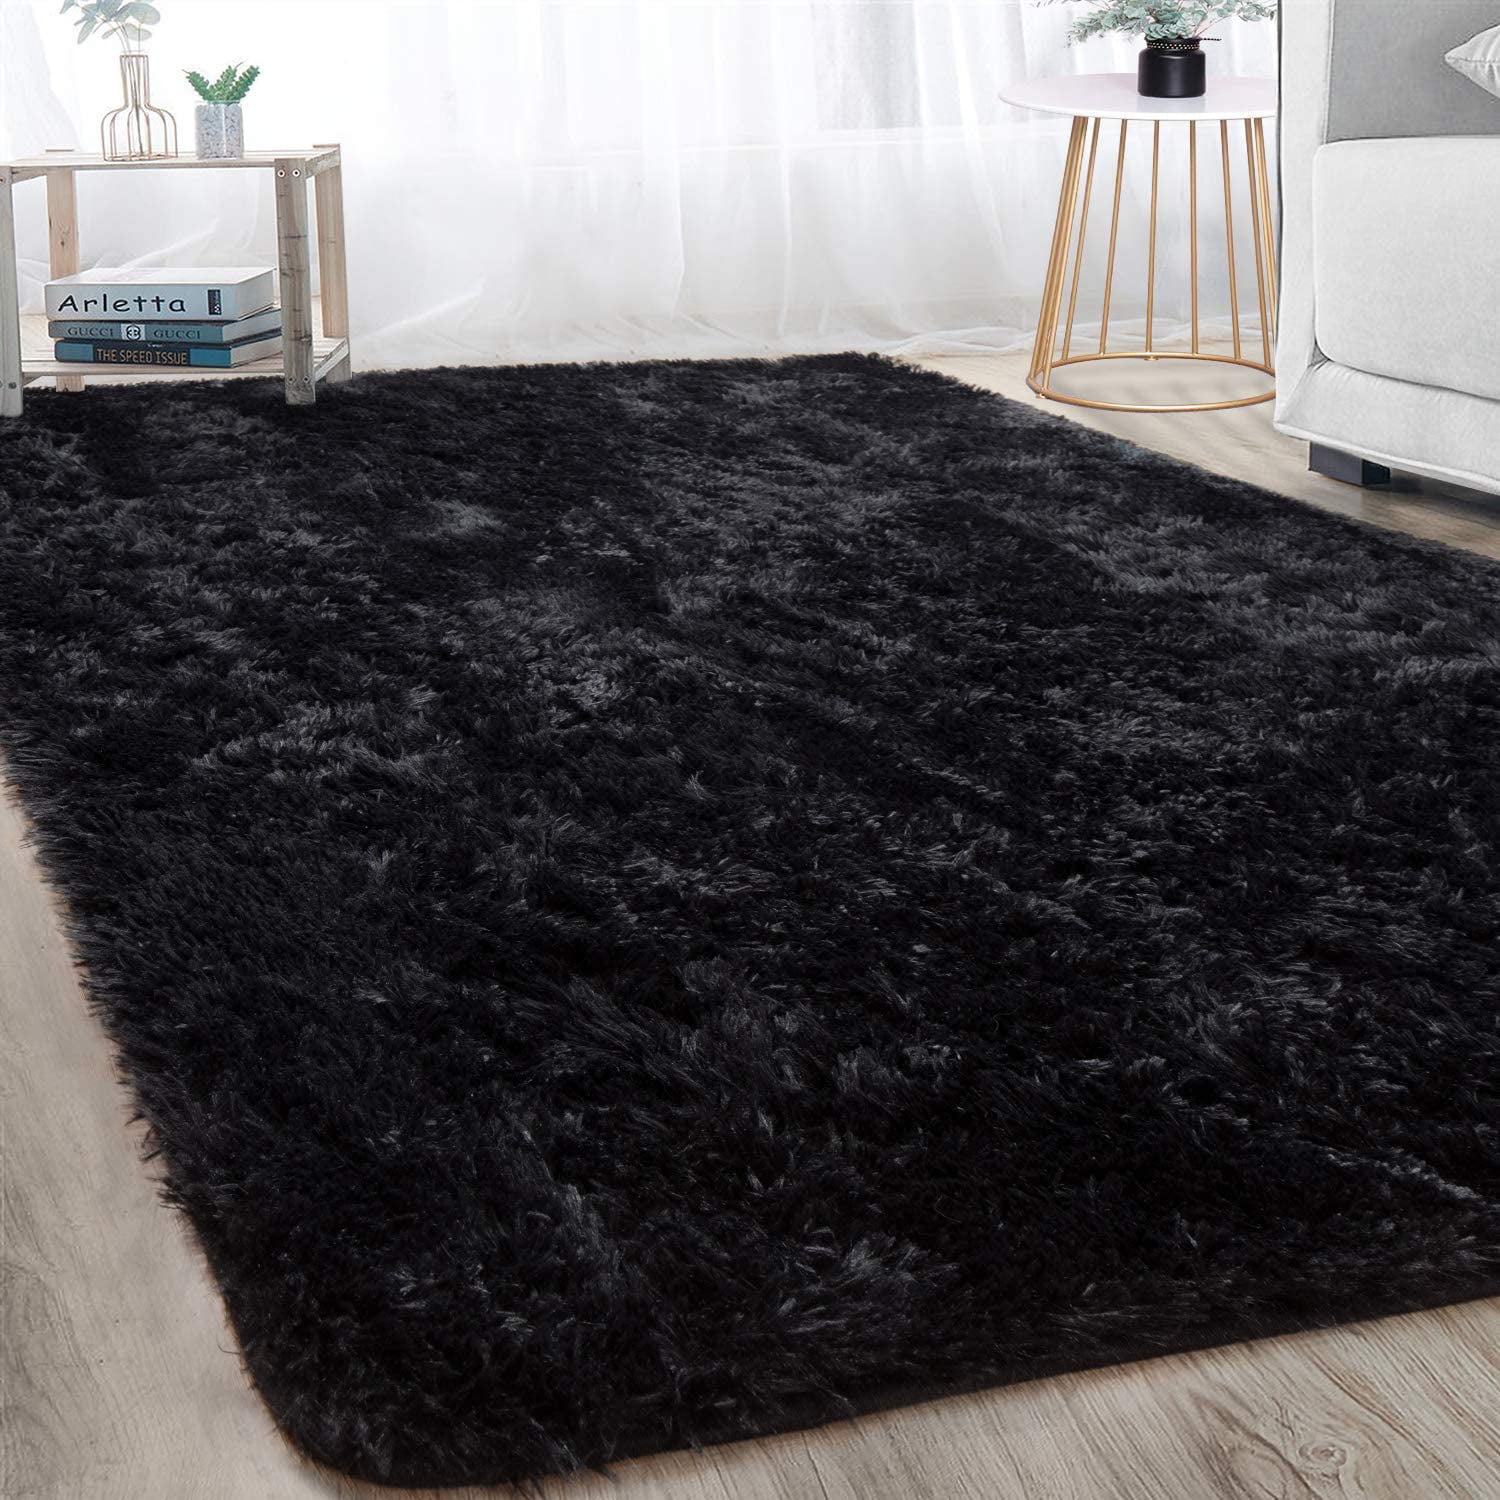 Details about   Fluffy Faux Fur Rug Large Small Area Rugs Comfy Shaggy Bedroom Carpets Floor Mat 